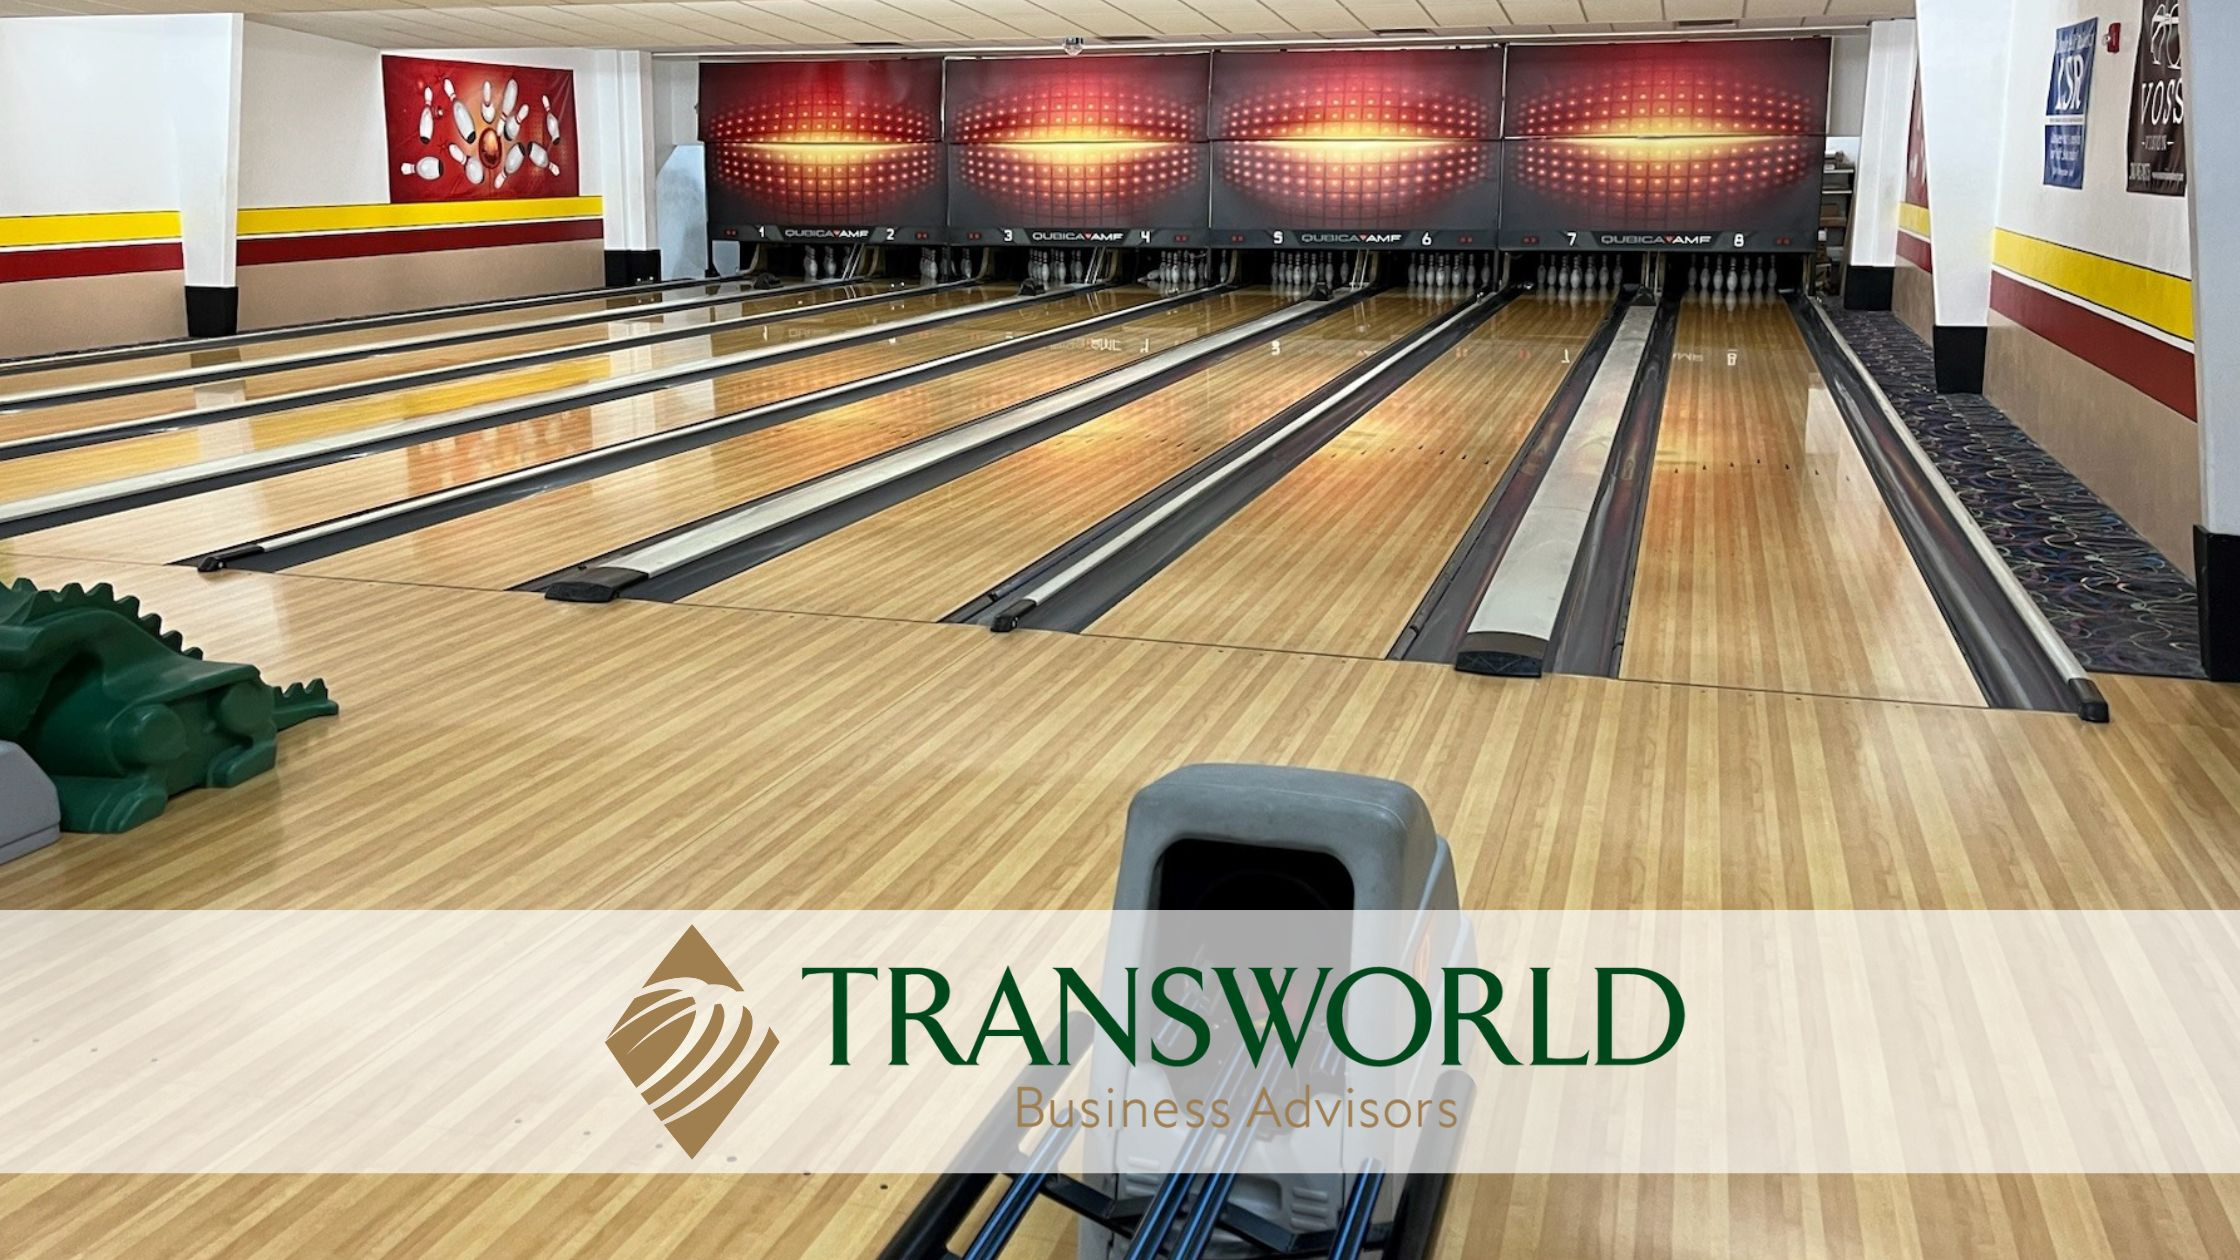 New Price Bowling Movies Restaurant and Games